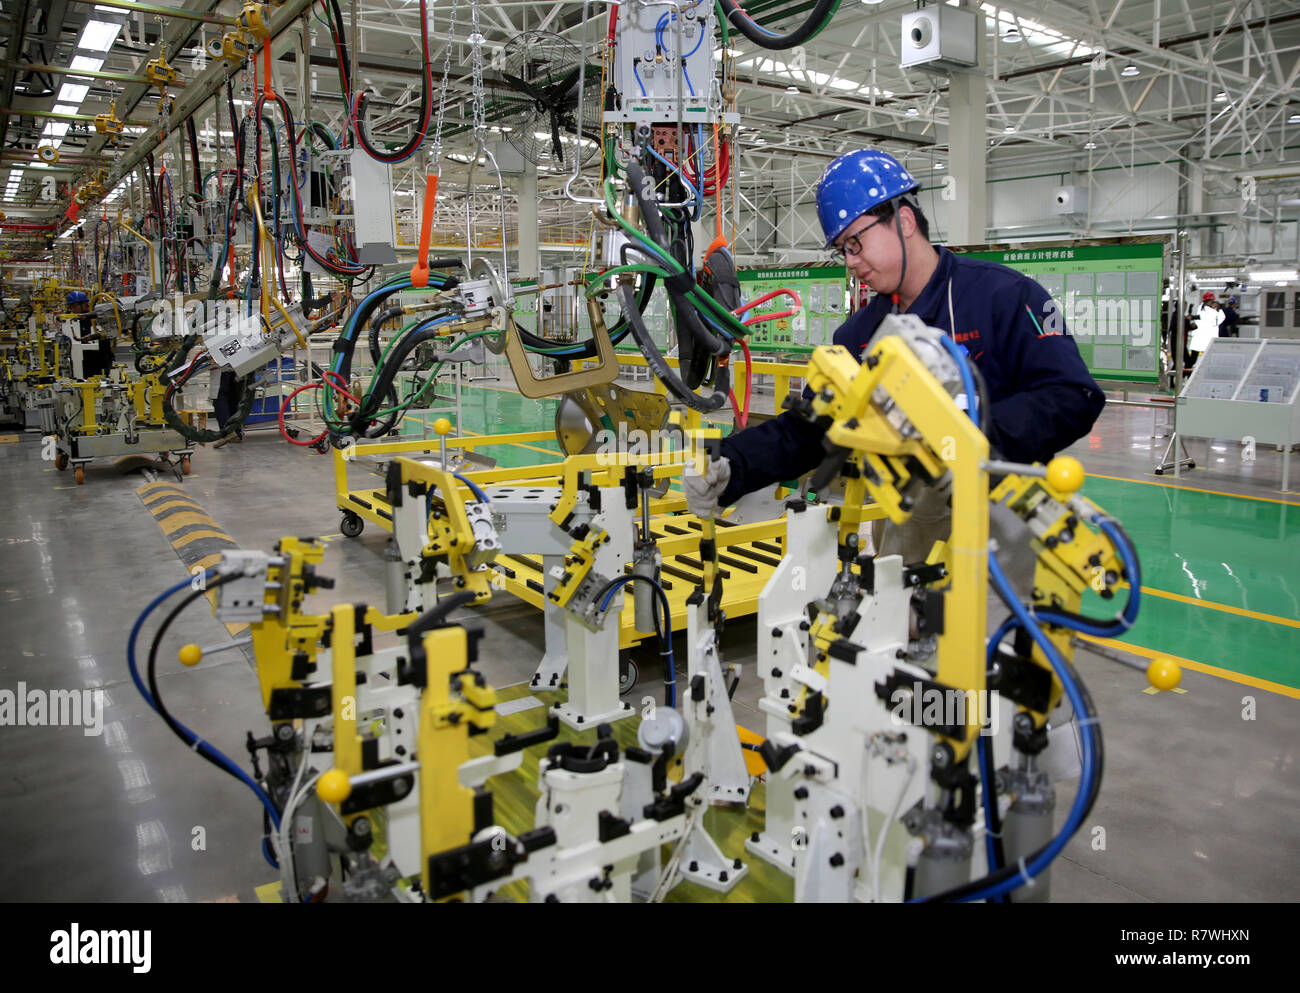 Sanmenxia, Sanmenxia, China. 11th Dec, 2018. Sanmenxia, CHINA-Workers are busy manufacturing electric vehicles at Suda Electric Vehicle Company in Sanmenxia, central ChinaÃ¢â‚¬â„¢s Henan Province. Credit: SIPA Asia/ZUMA Wire/Alamy Live News Stock Photo